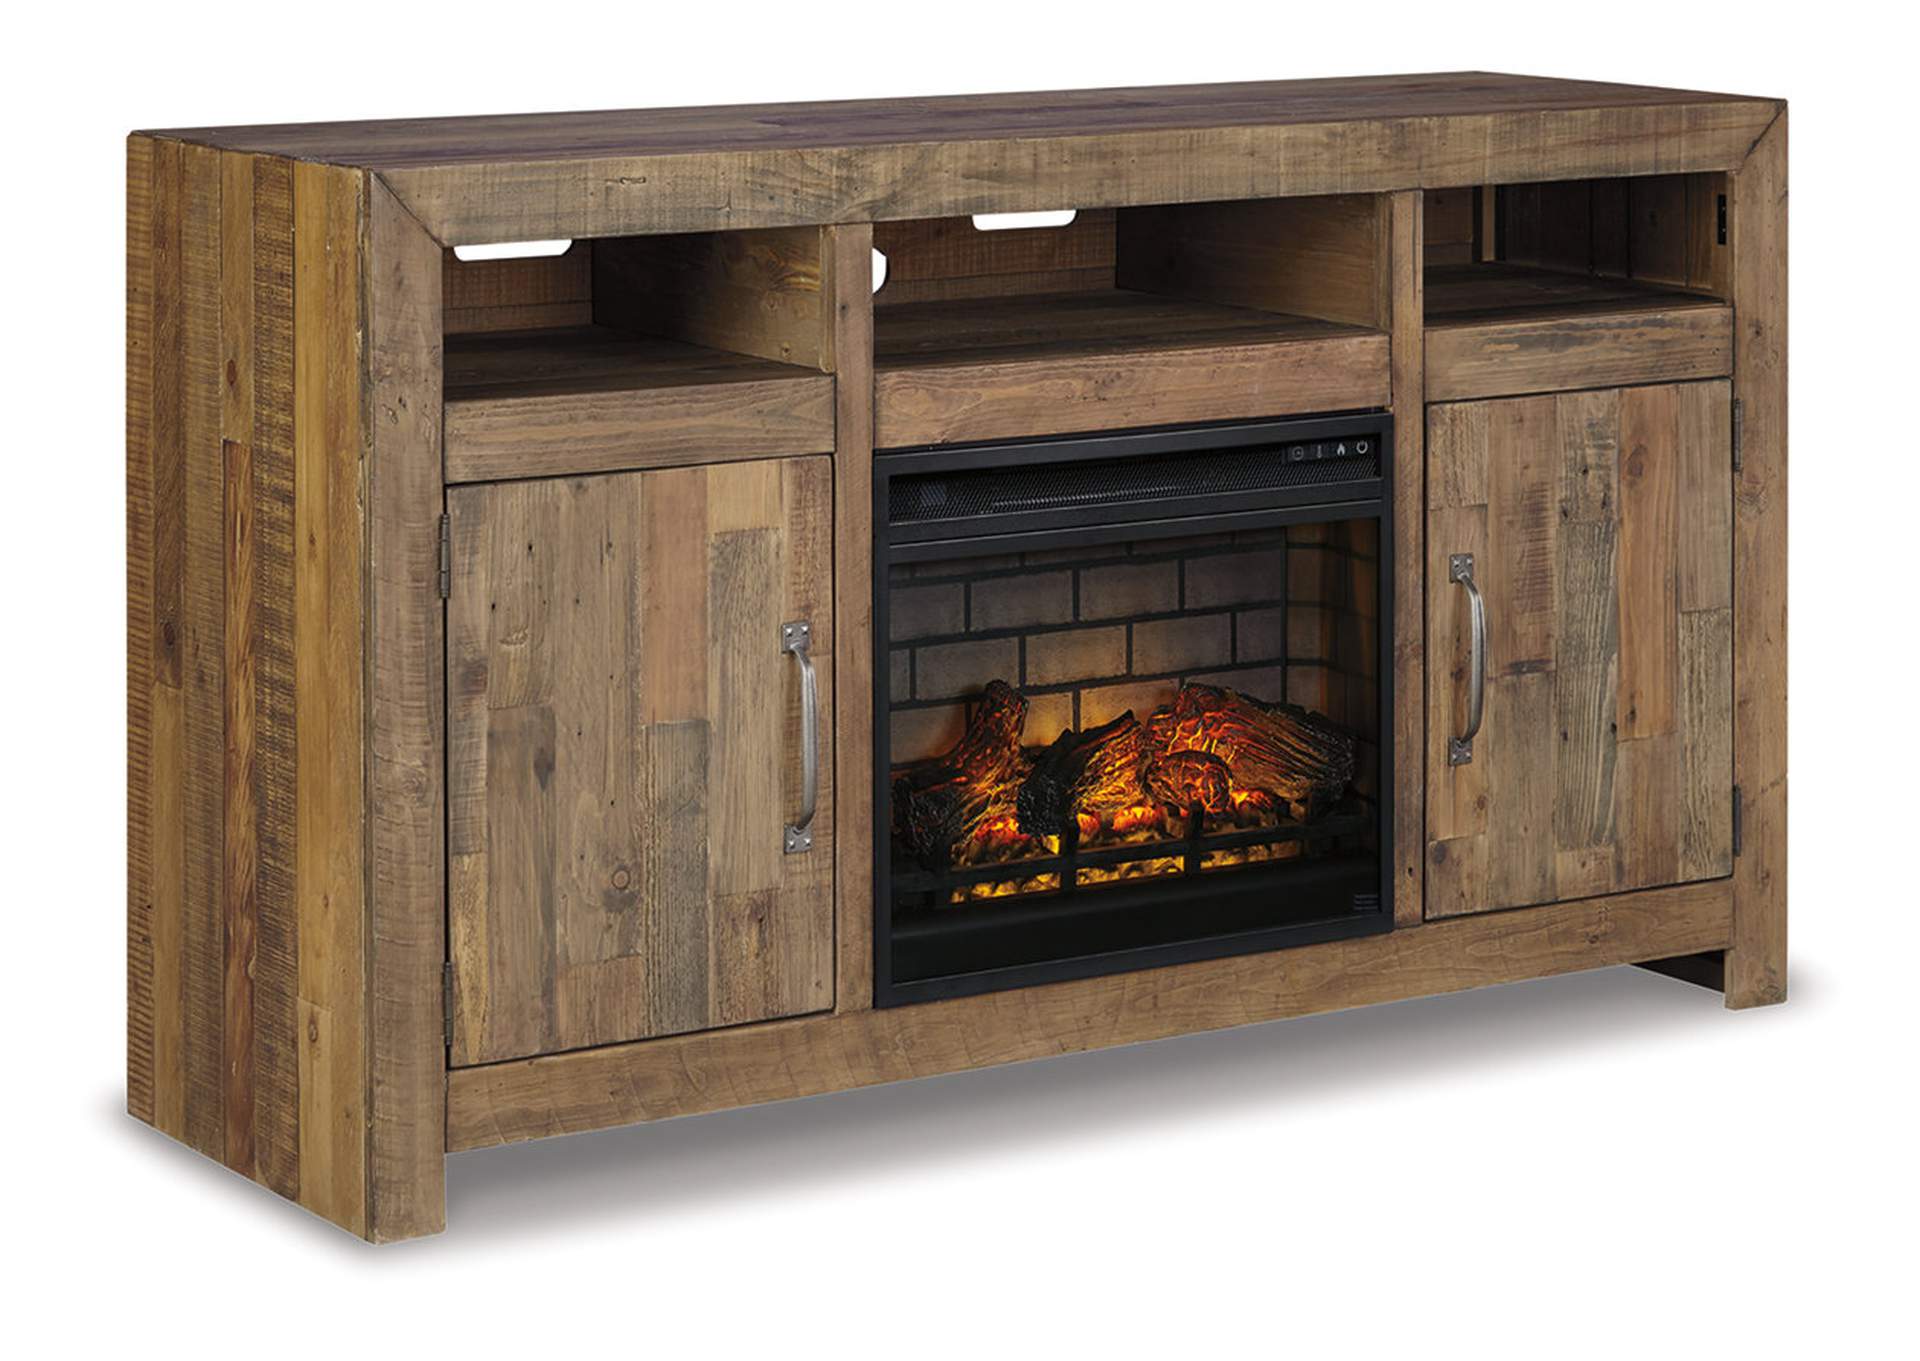 Sommerford 62" TV Stand with Electric Fireplace,Signature Design By Ashley